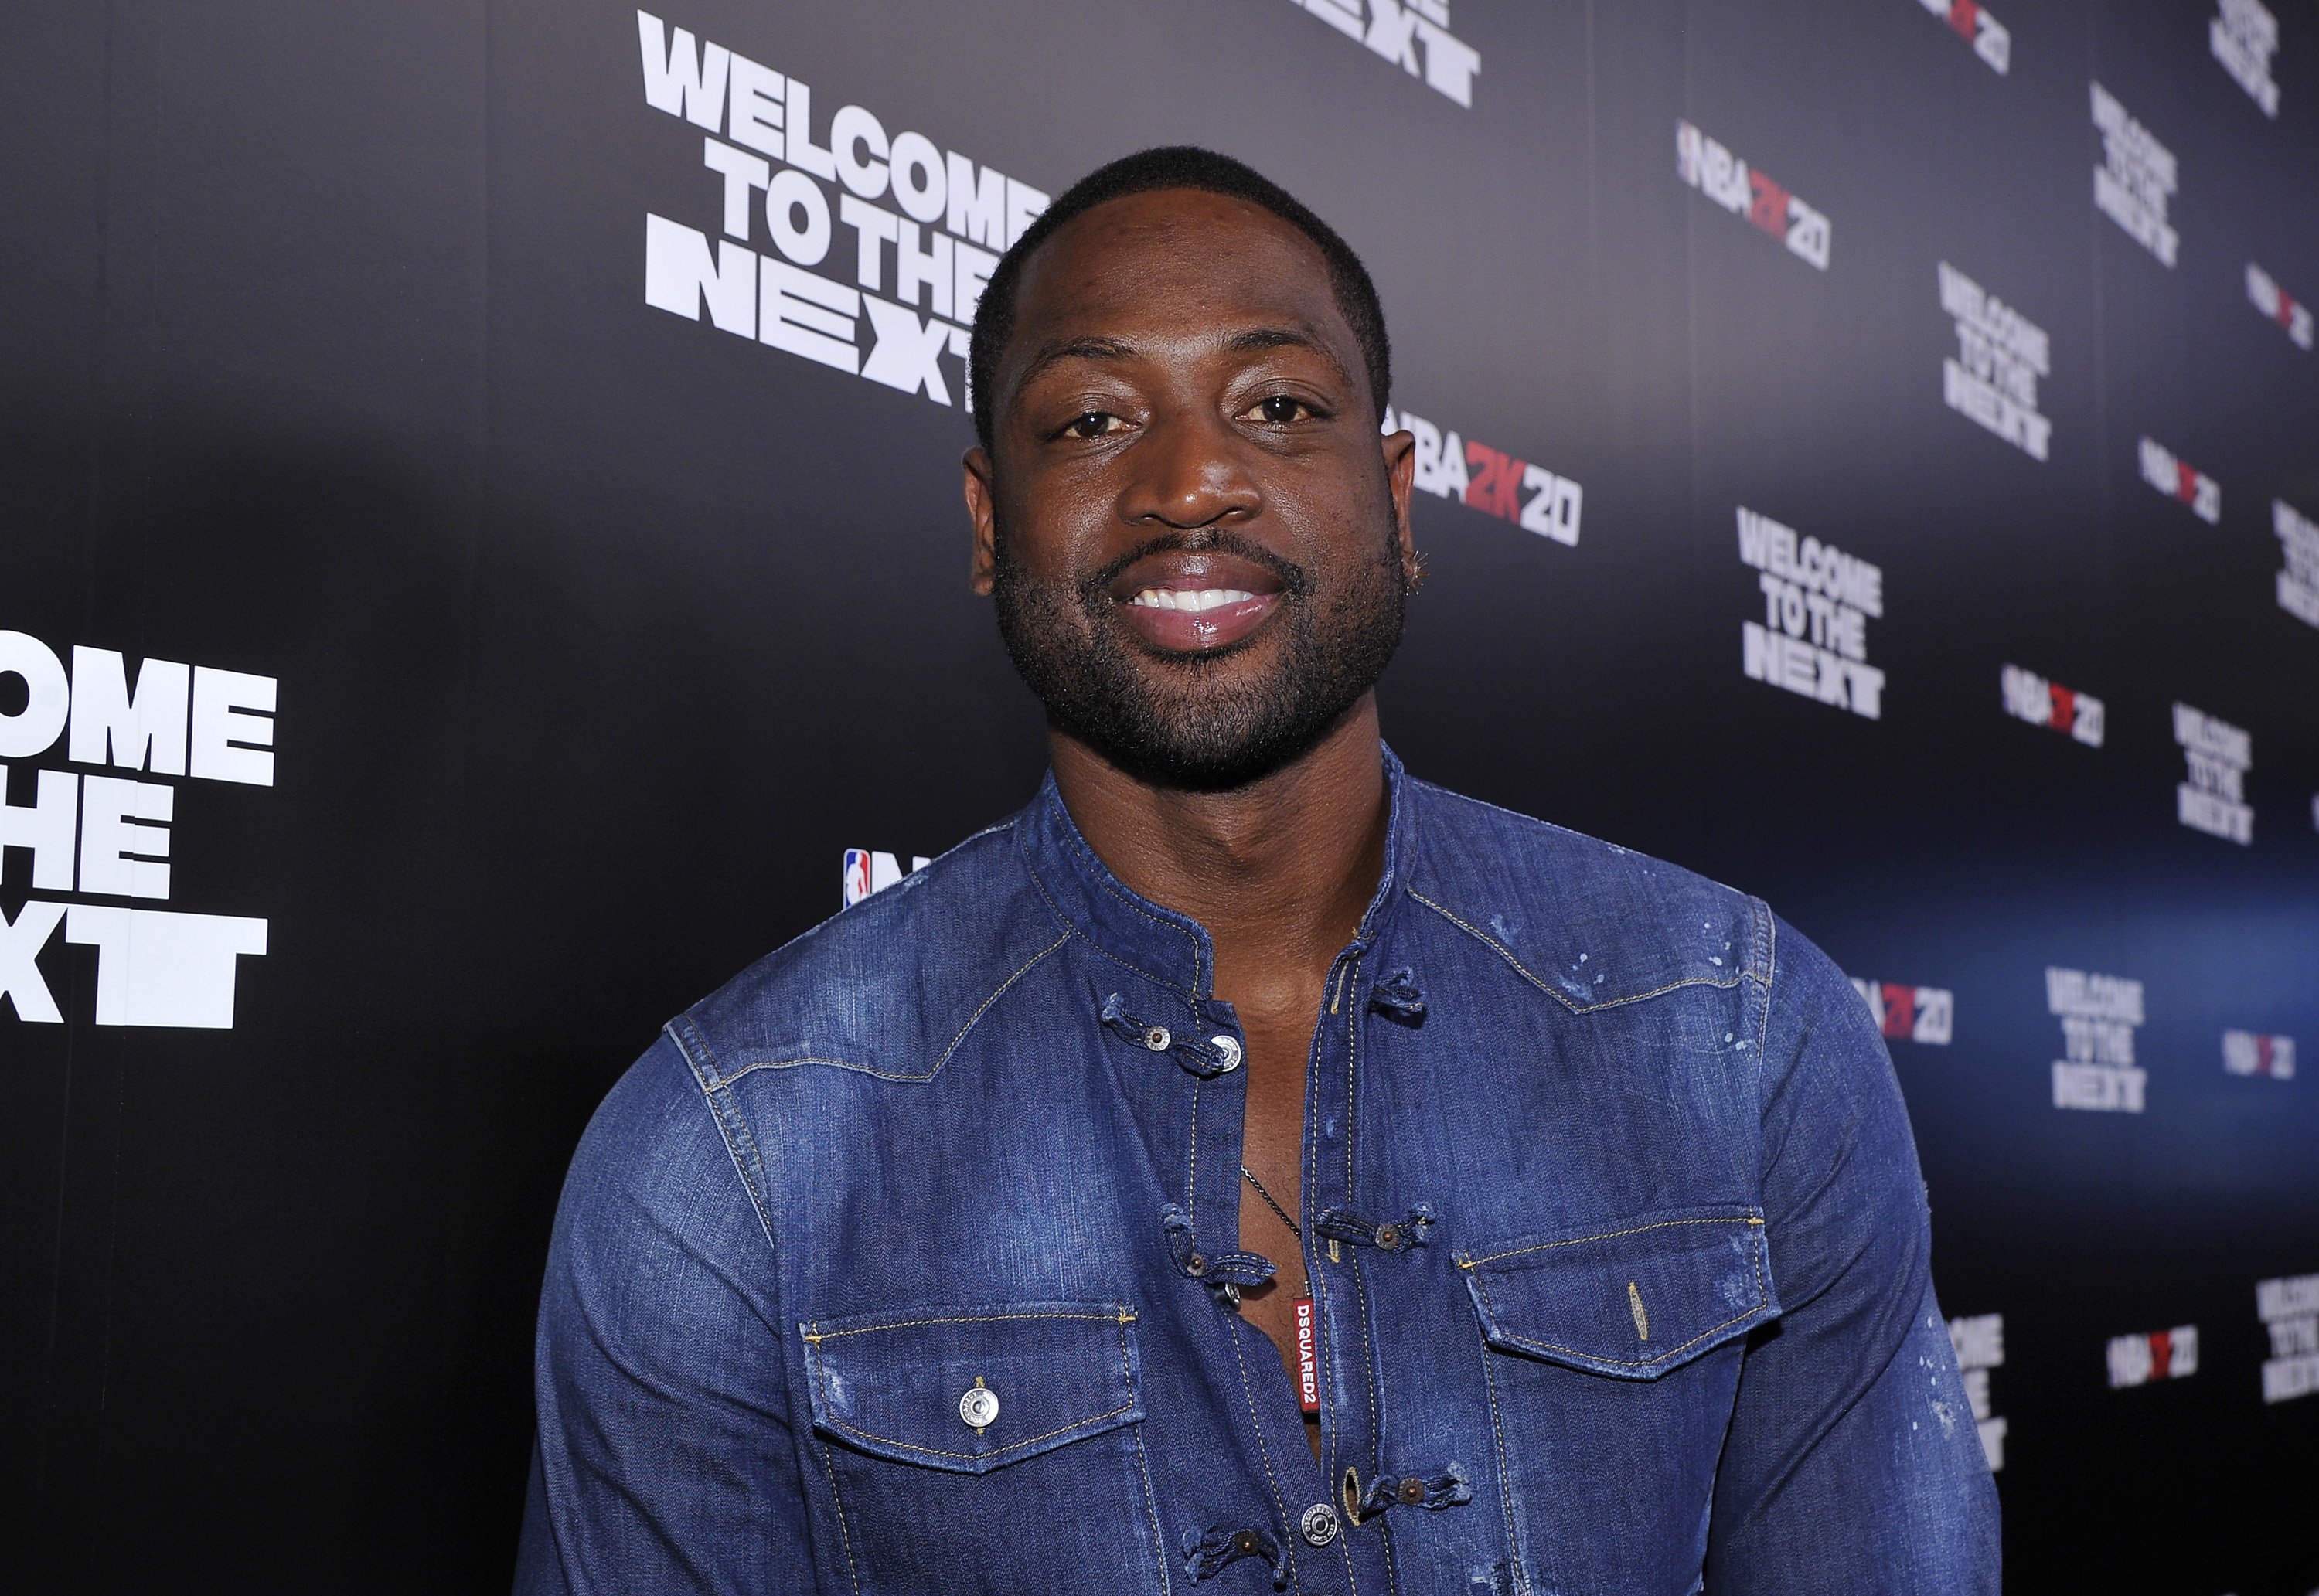  Dwyane Wade at the NBA 2K20: Welcome to the Next on September 05, 2019 in Los Angeles, California. | Source: Getty Images